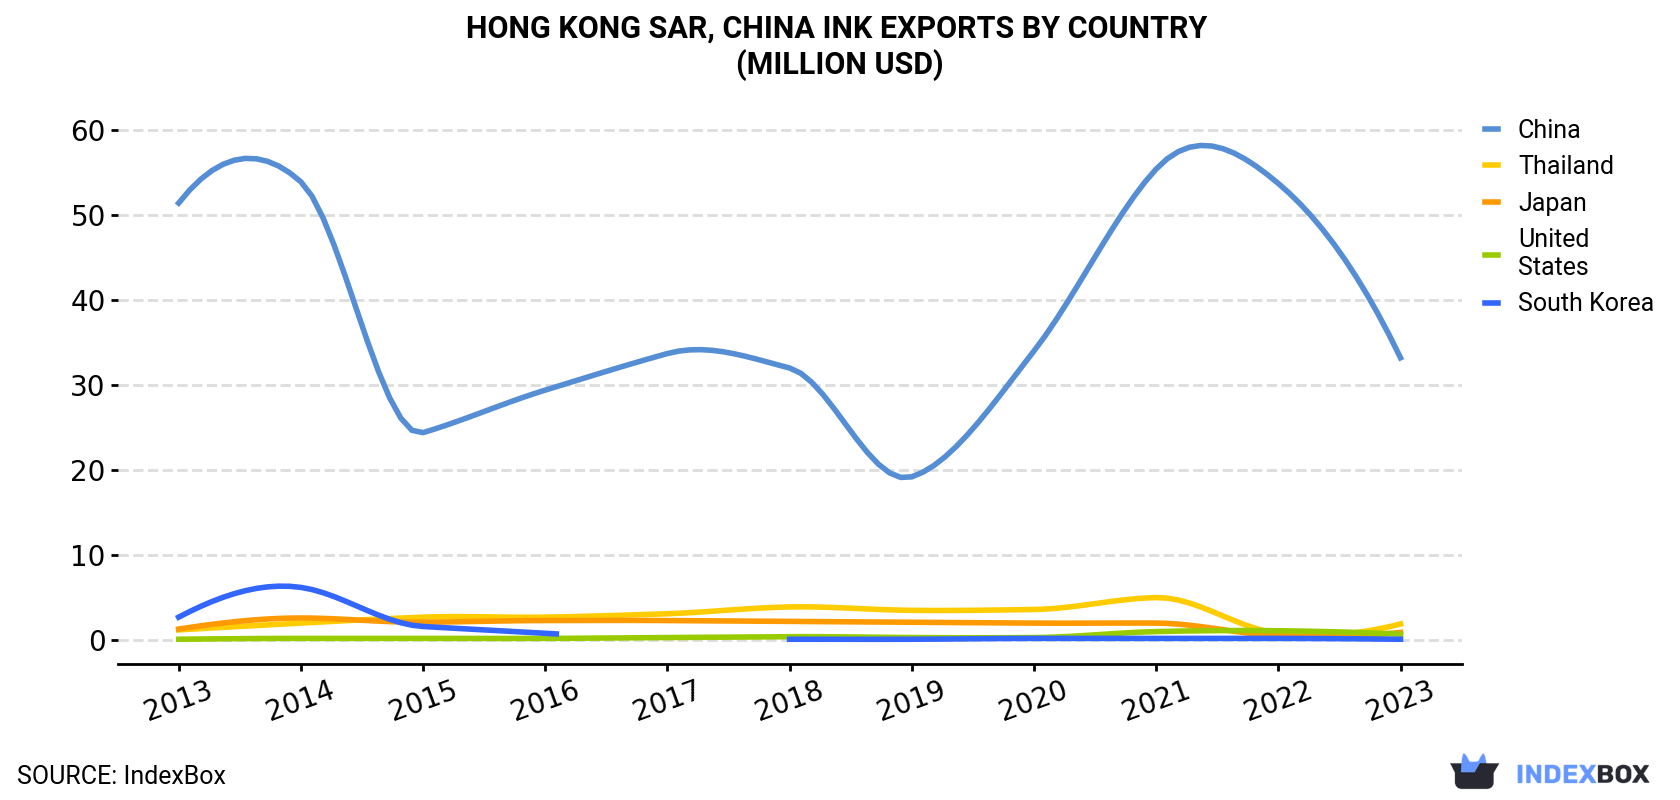 Hong Kong Ink Exports By Country (Million USD)